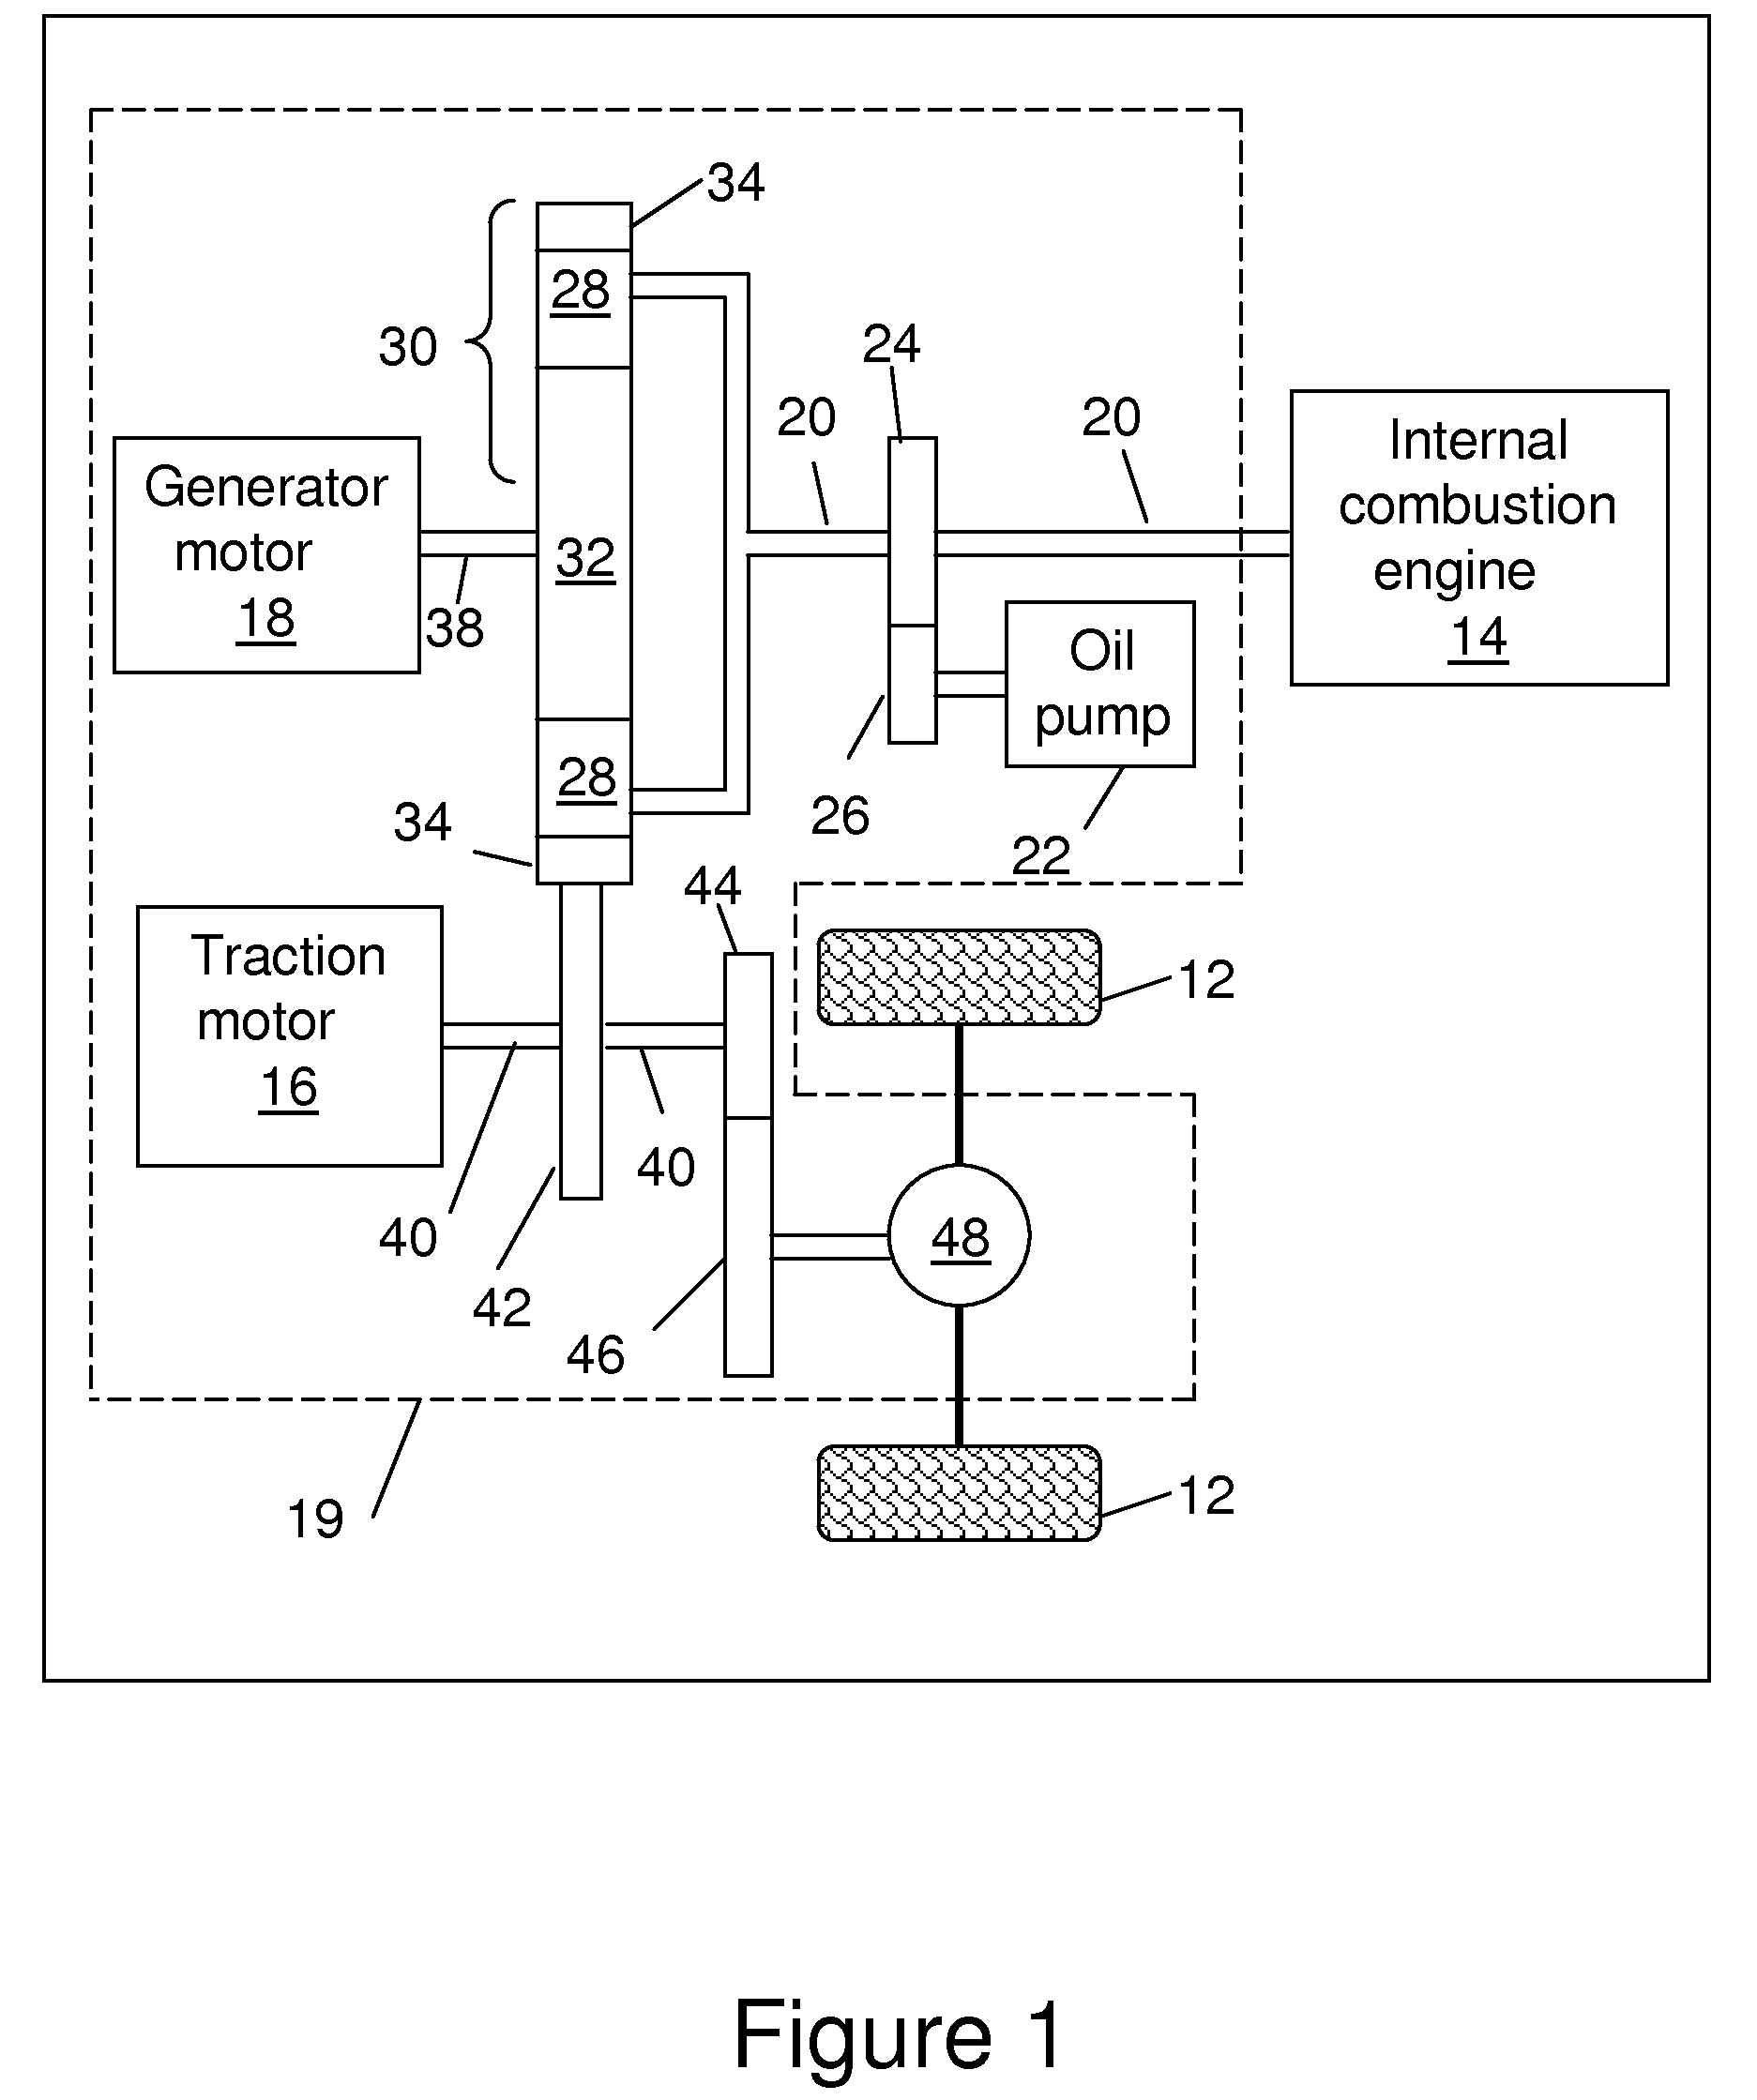 System and method to provide lubrication for a plug-in hybrid